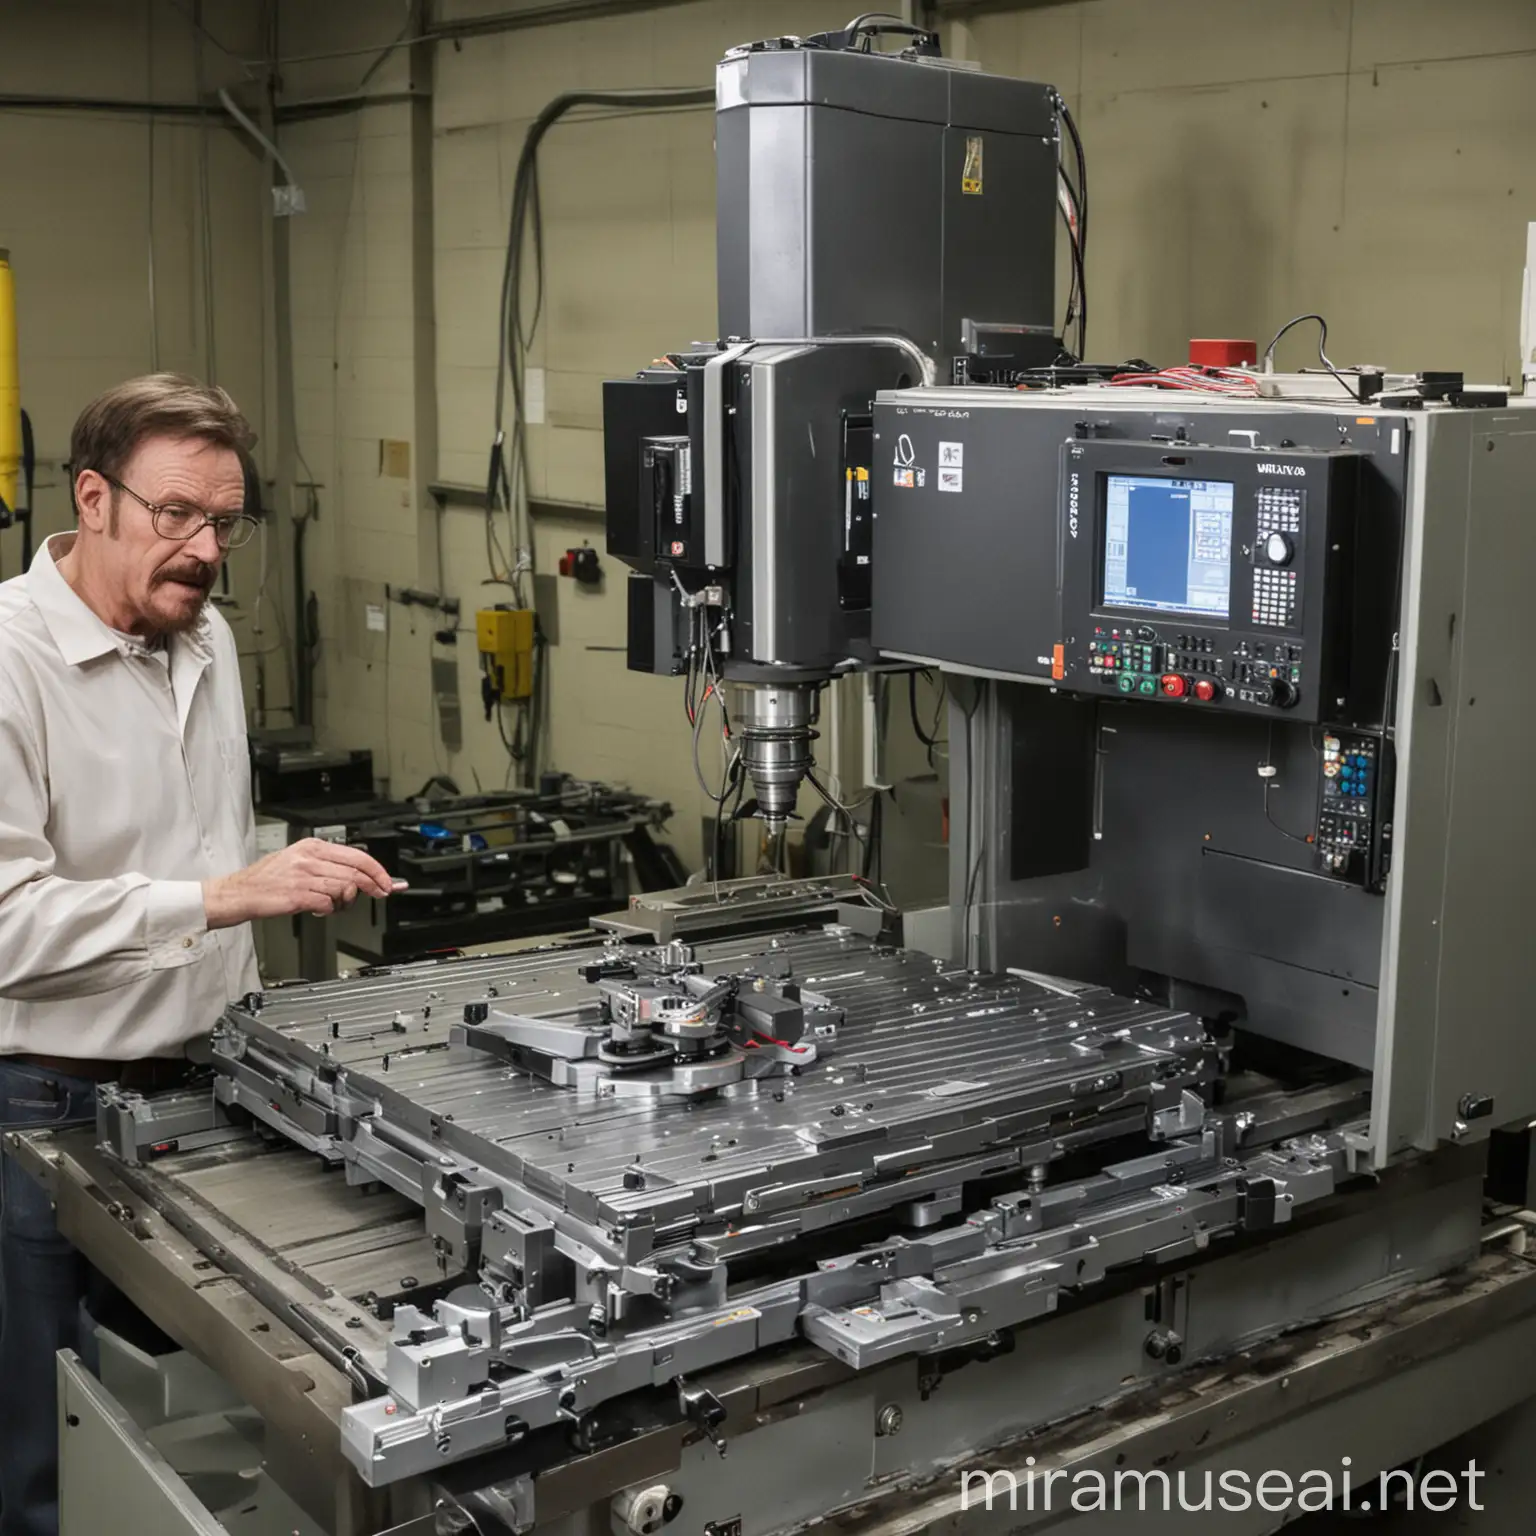 A CNC machine being operated by Walter White